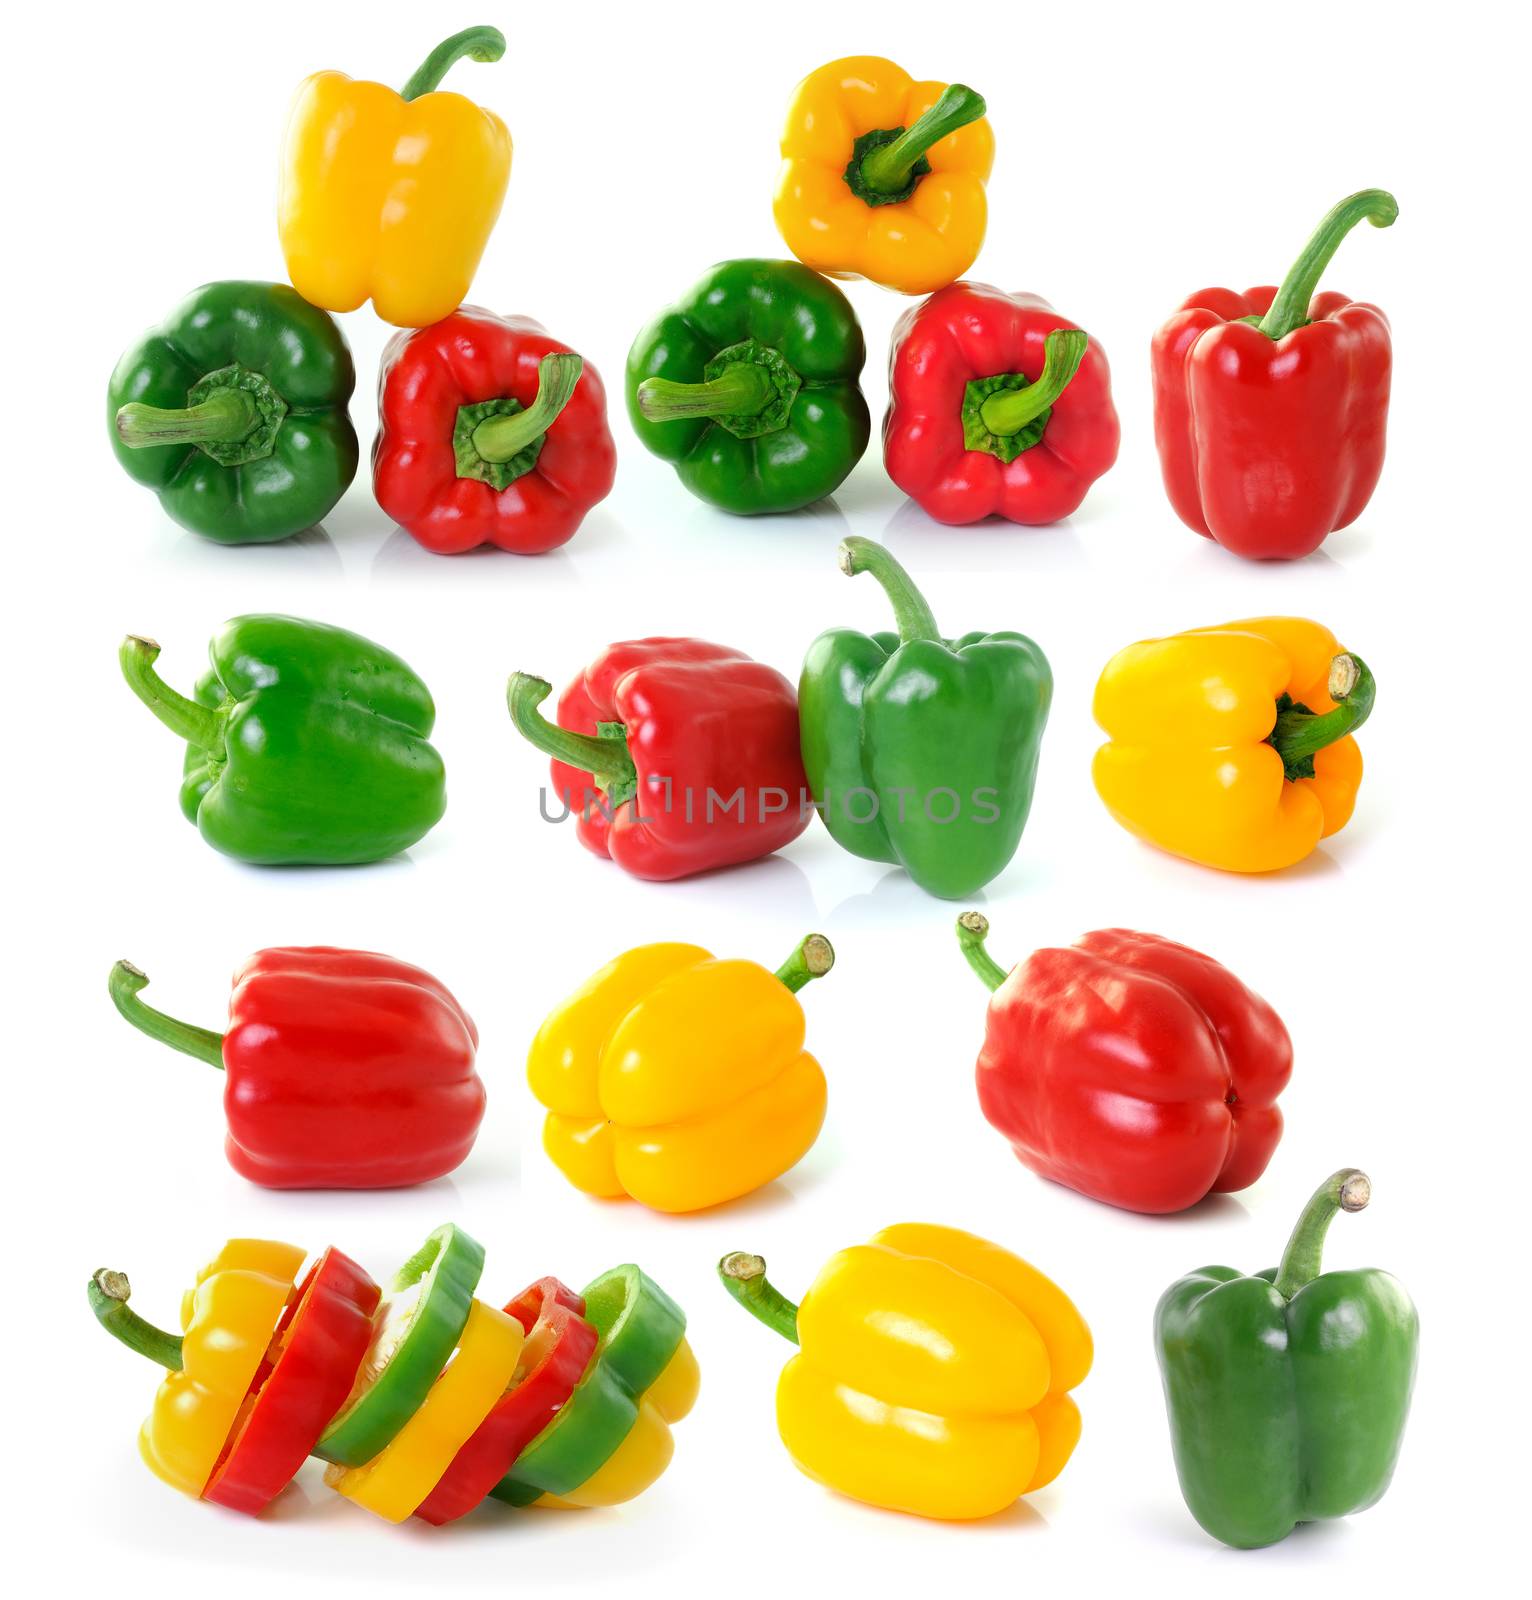 green yellow red pepper on white background